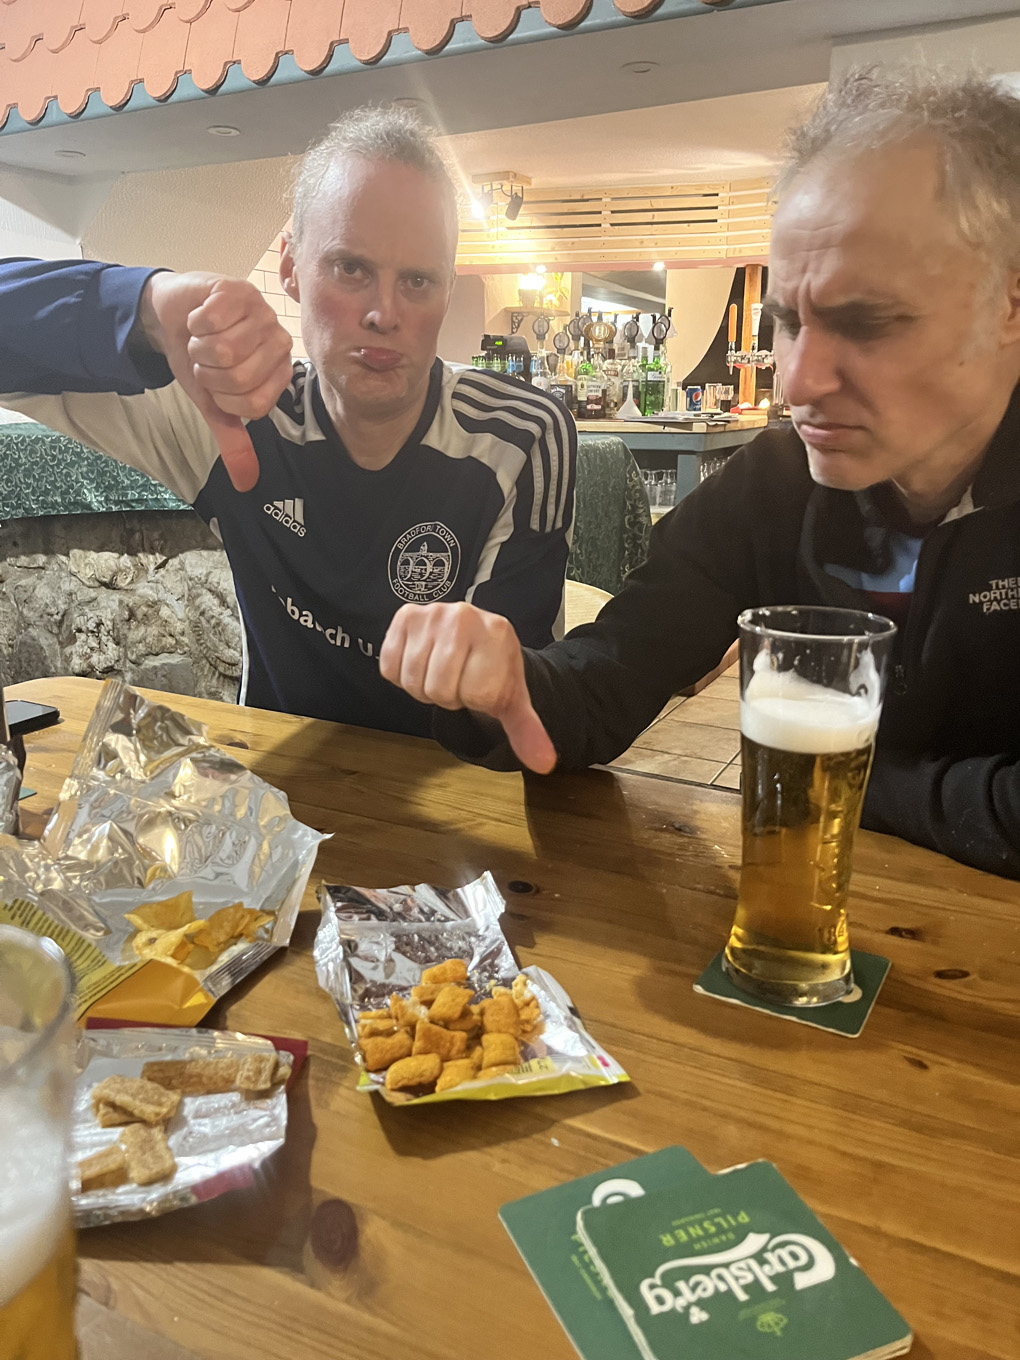 Two middle aged men in football shirts indicating their displeasure with the snacks on the table in front of them